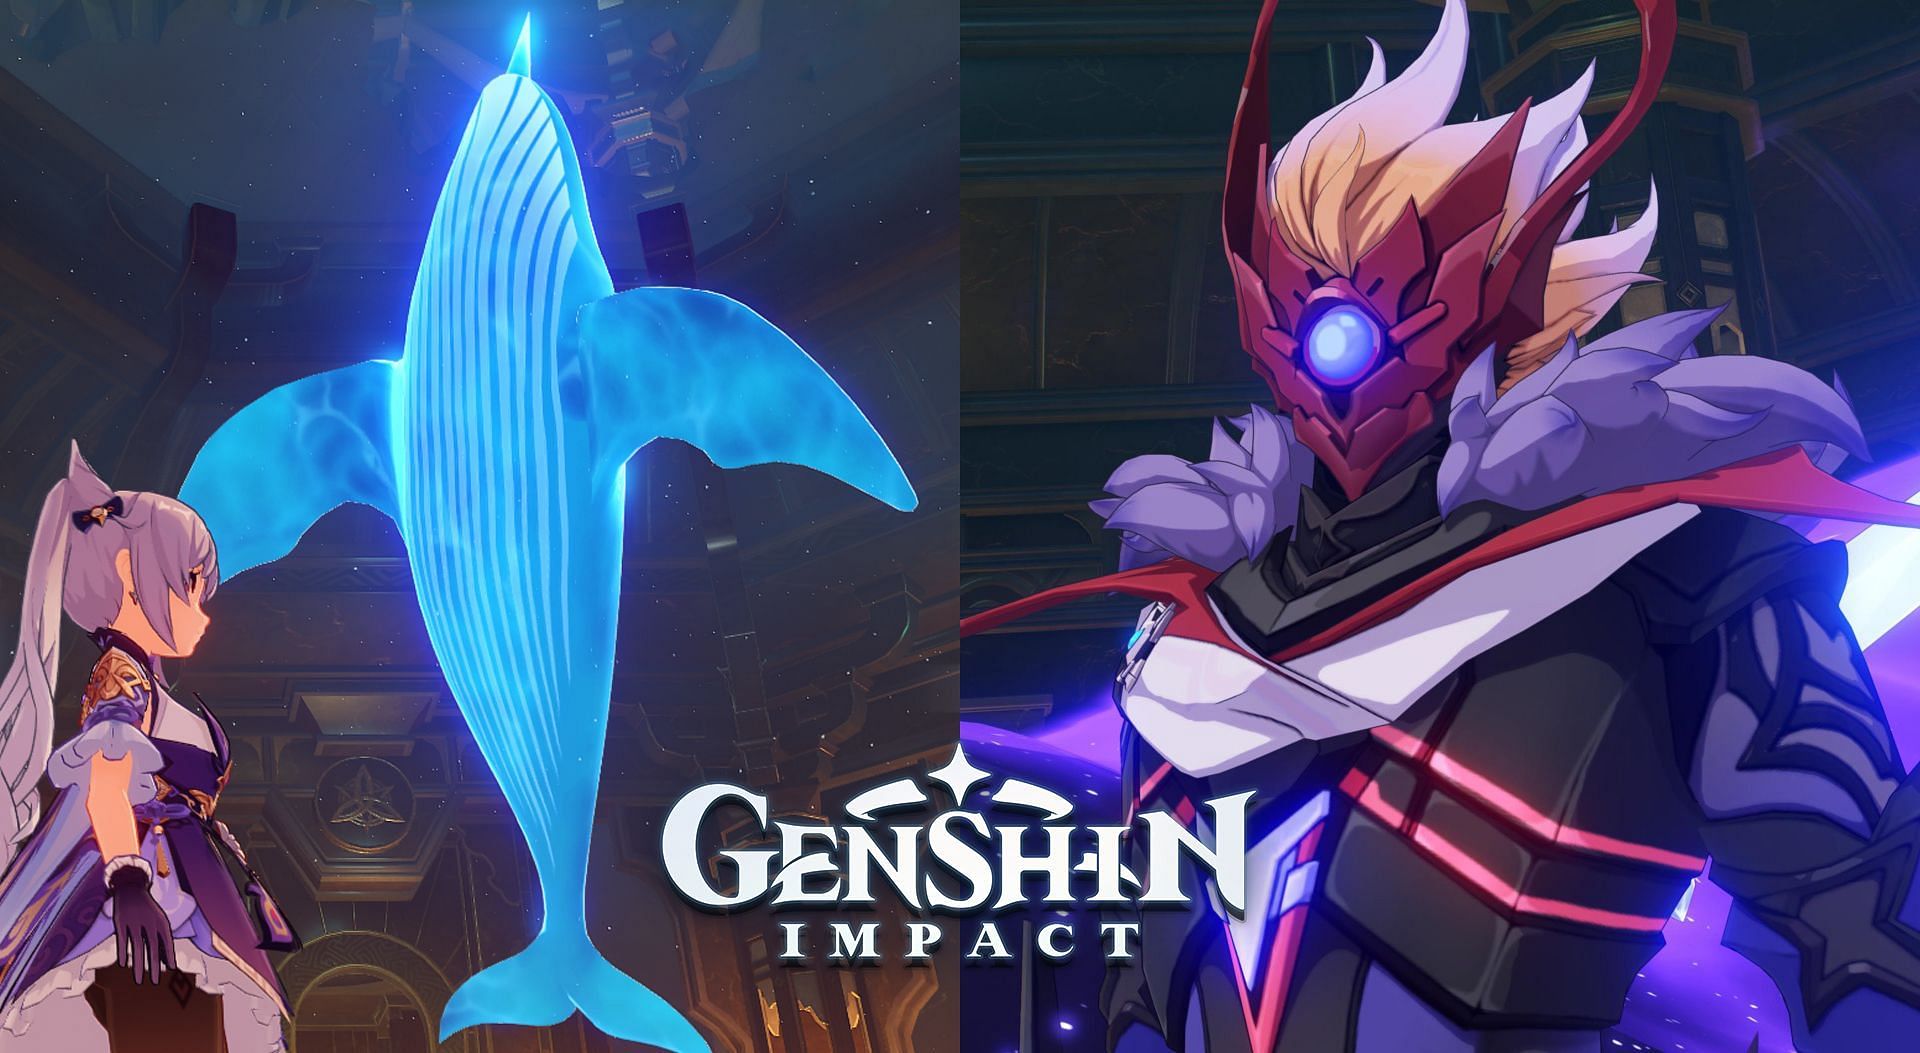 Genshin Impact 4.2 Leaks: Archon Quest And Story Quest Characters Revealed  –